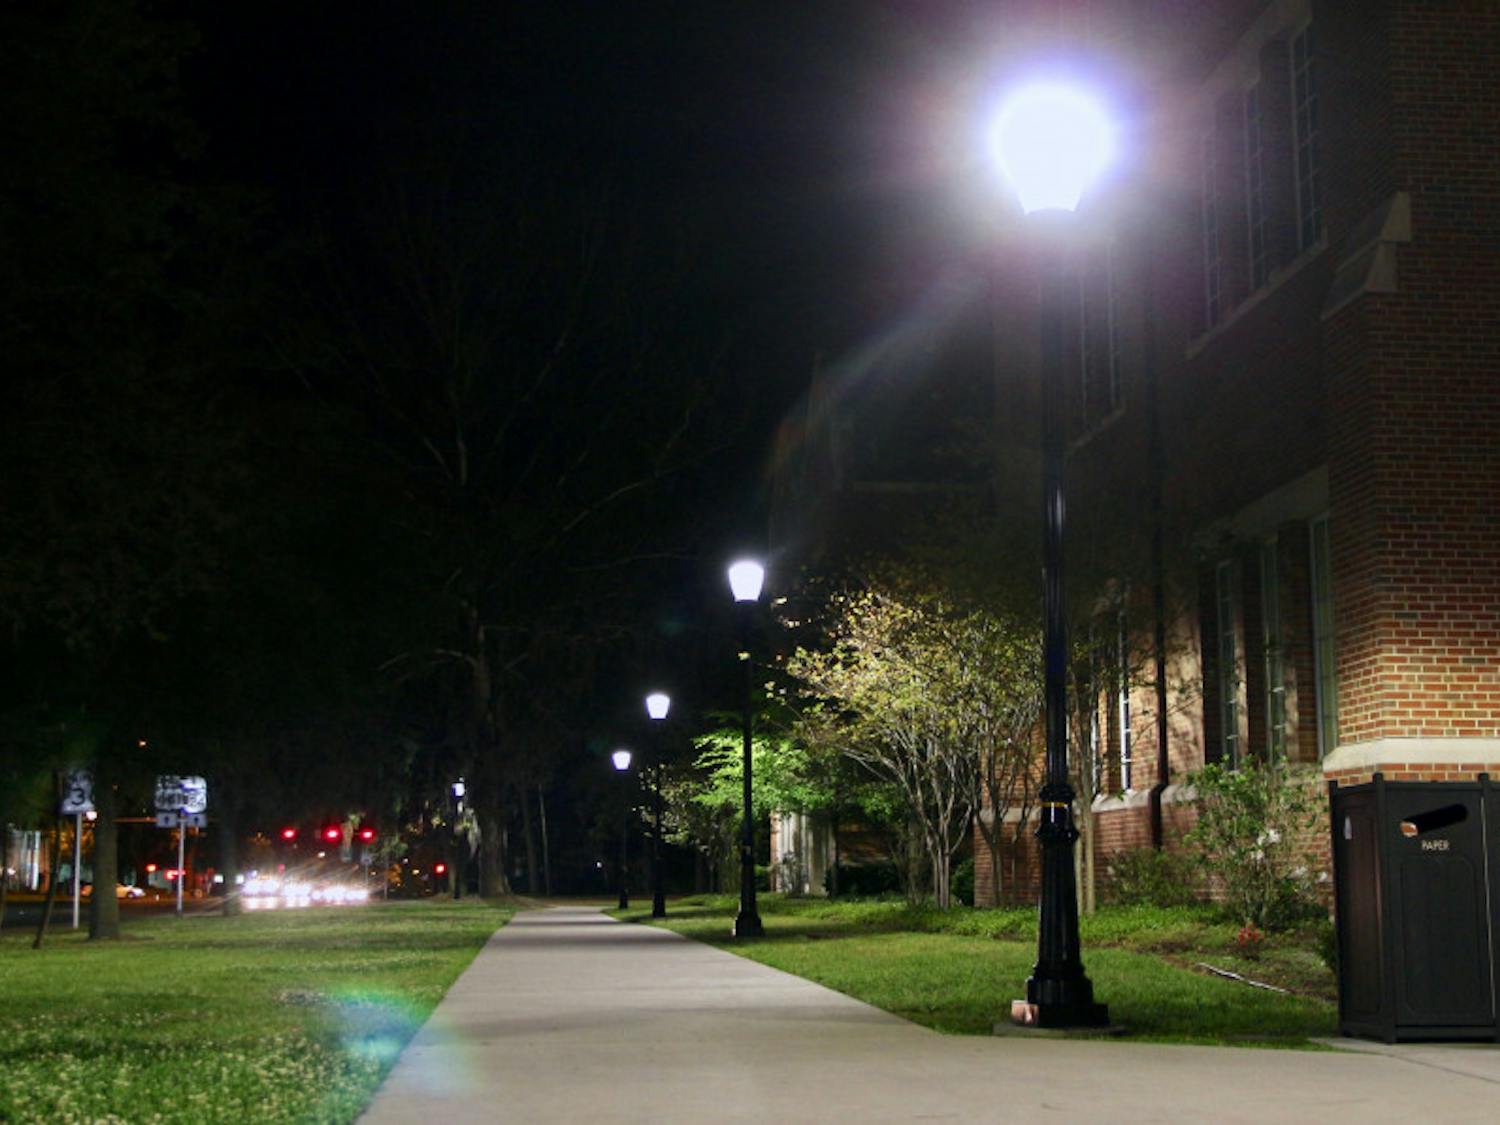 UF Facility Services is updating 500 campus lights with energy-efficient LED bulbs to increase campus safety.